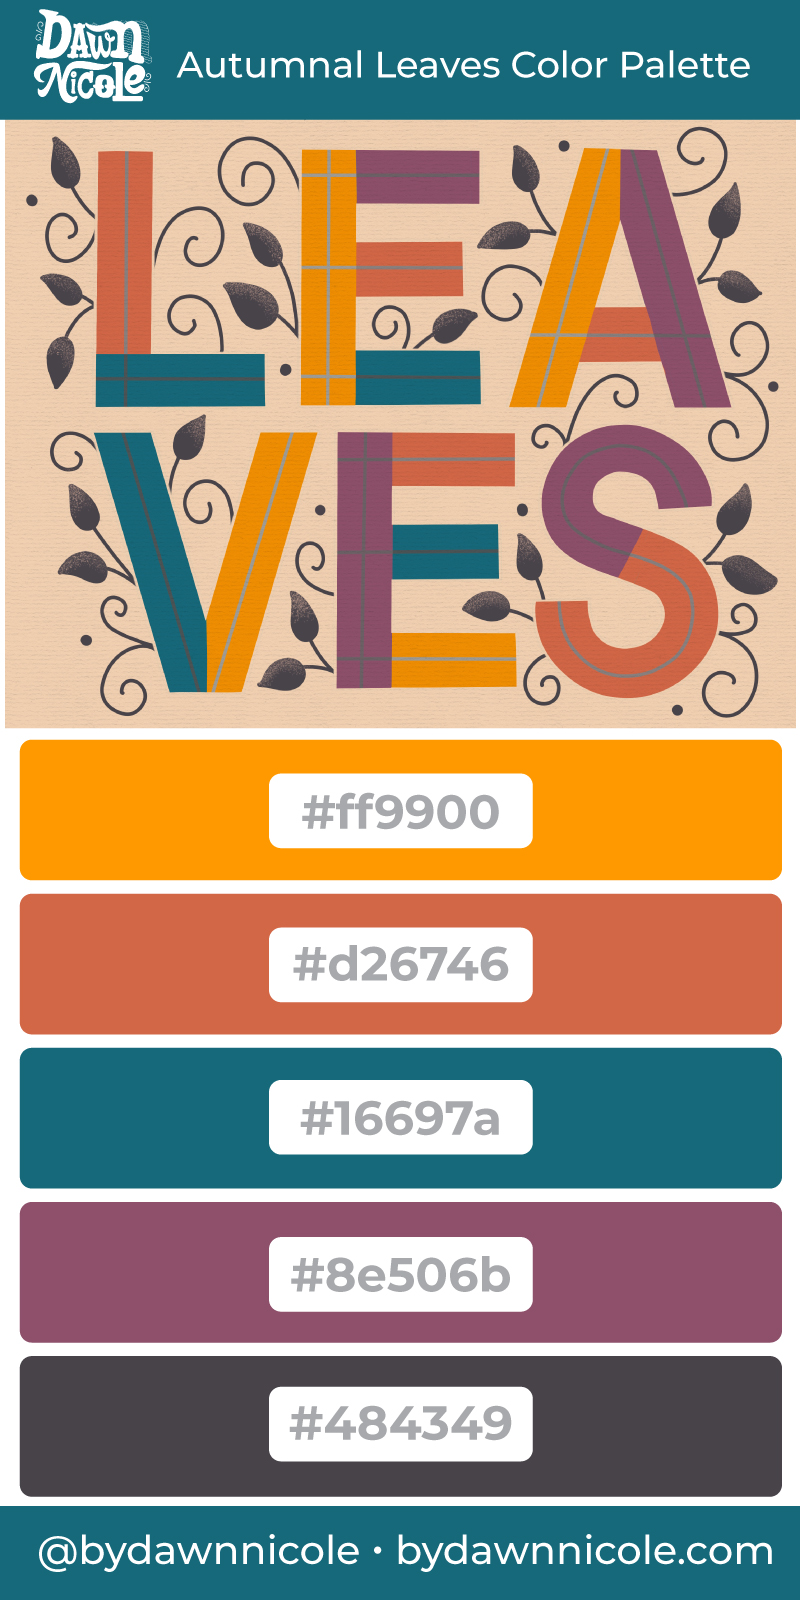 Autumnal Leaves Color Palette. Get this free Autumnal color palette, plus a few tips to level up your lettering!